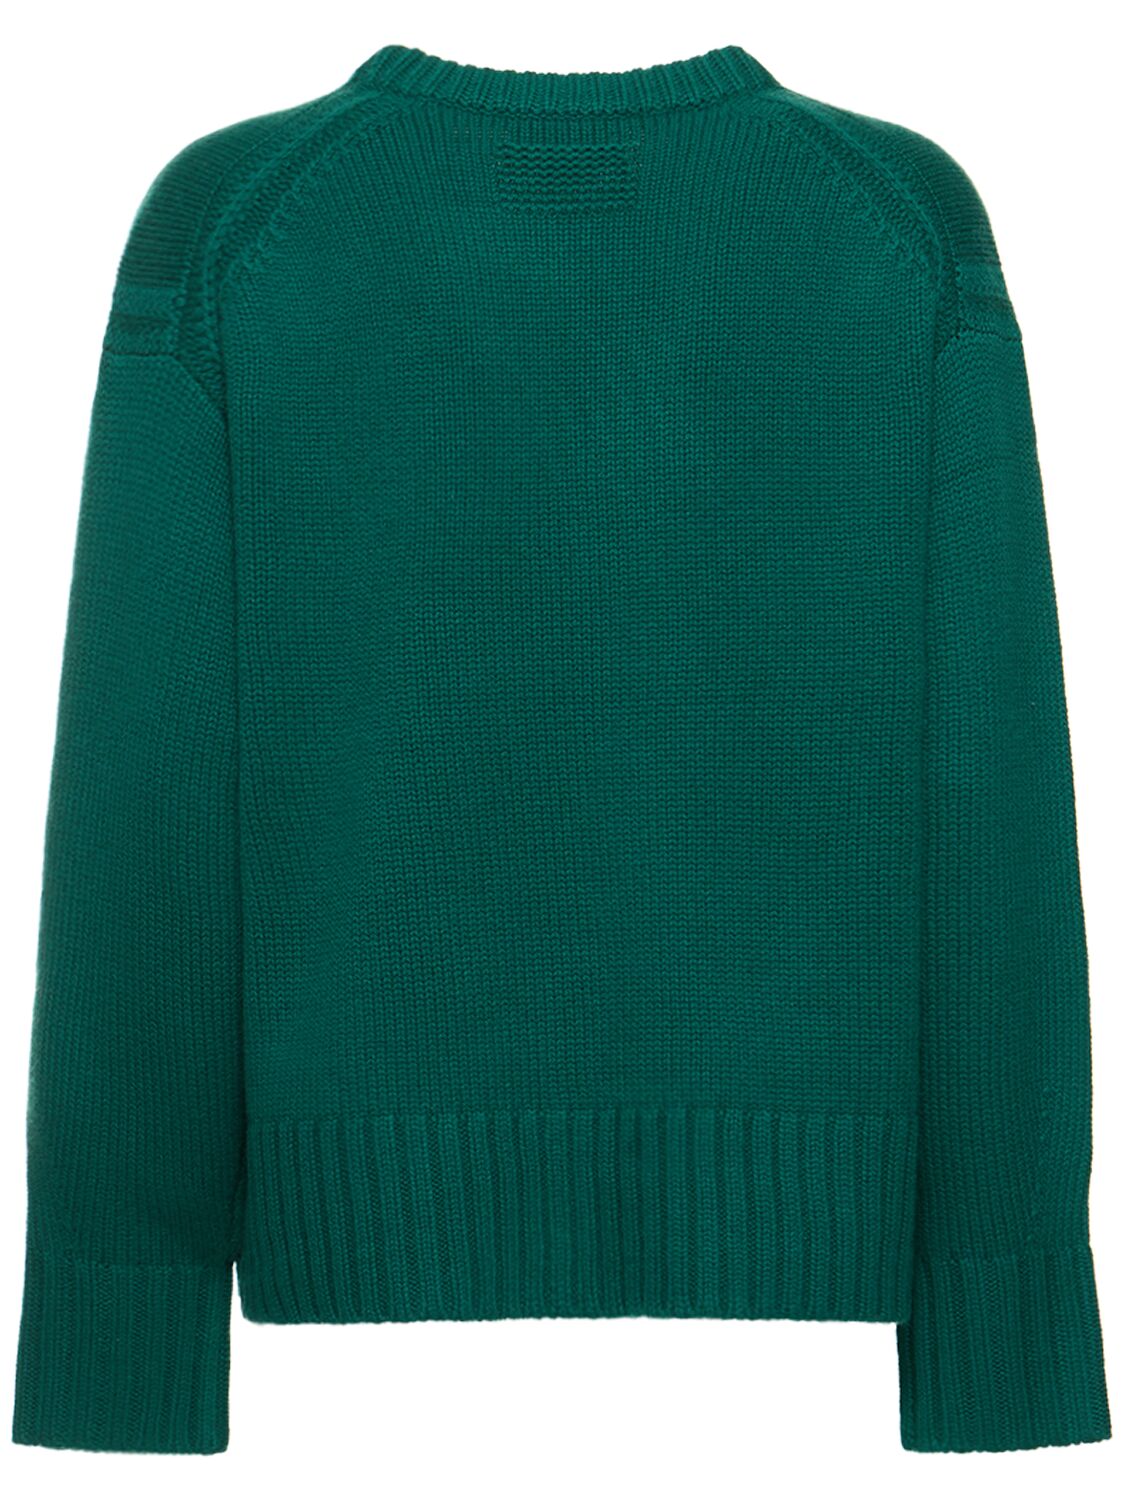 Guest in Residence Cozy Crew Cashmere Sweater